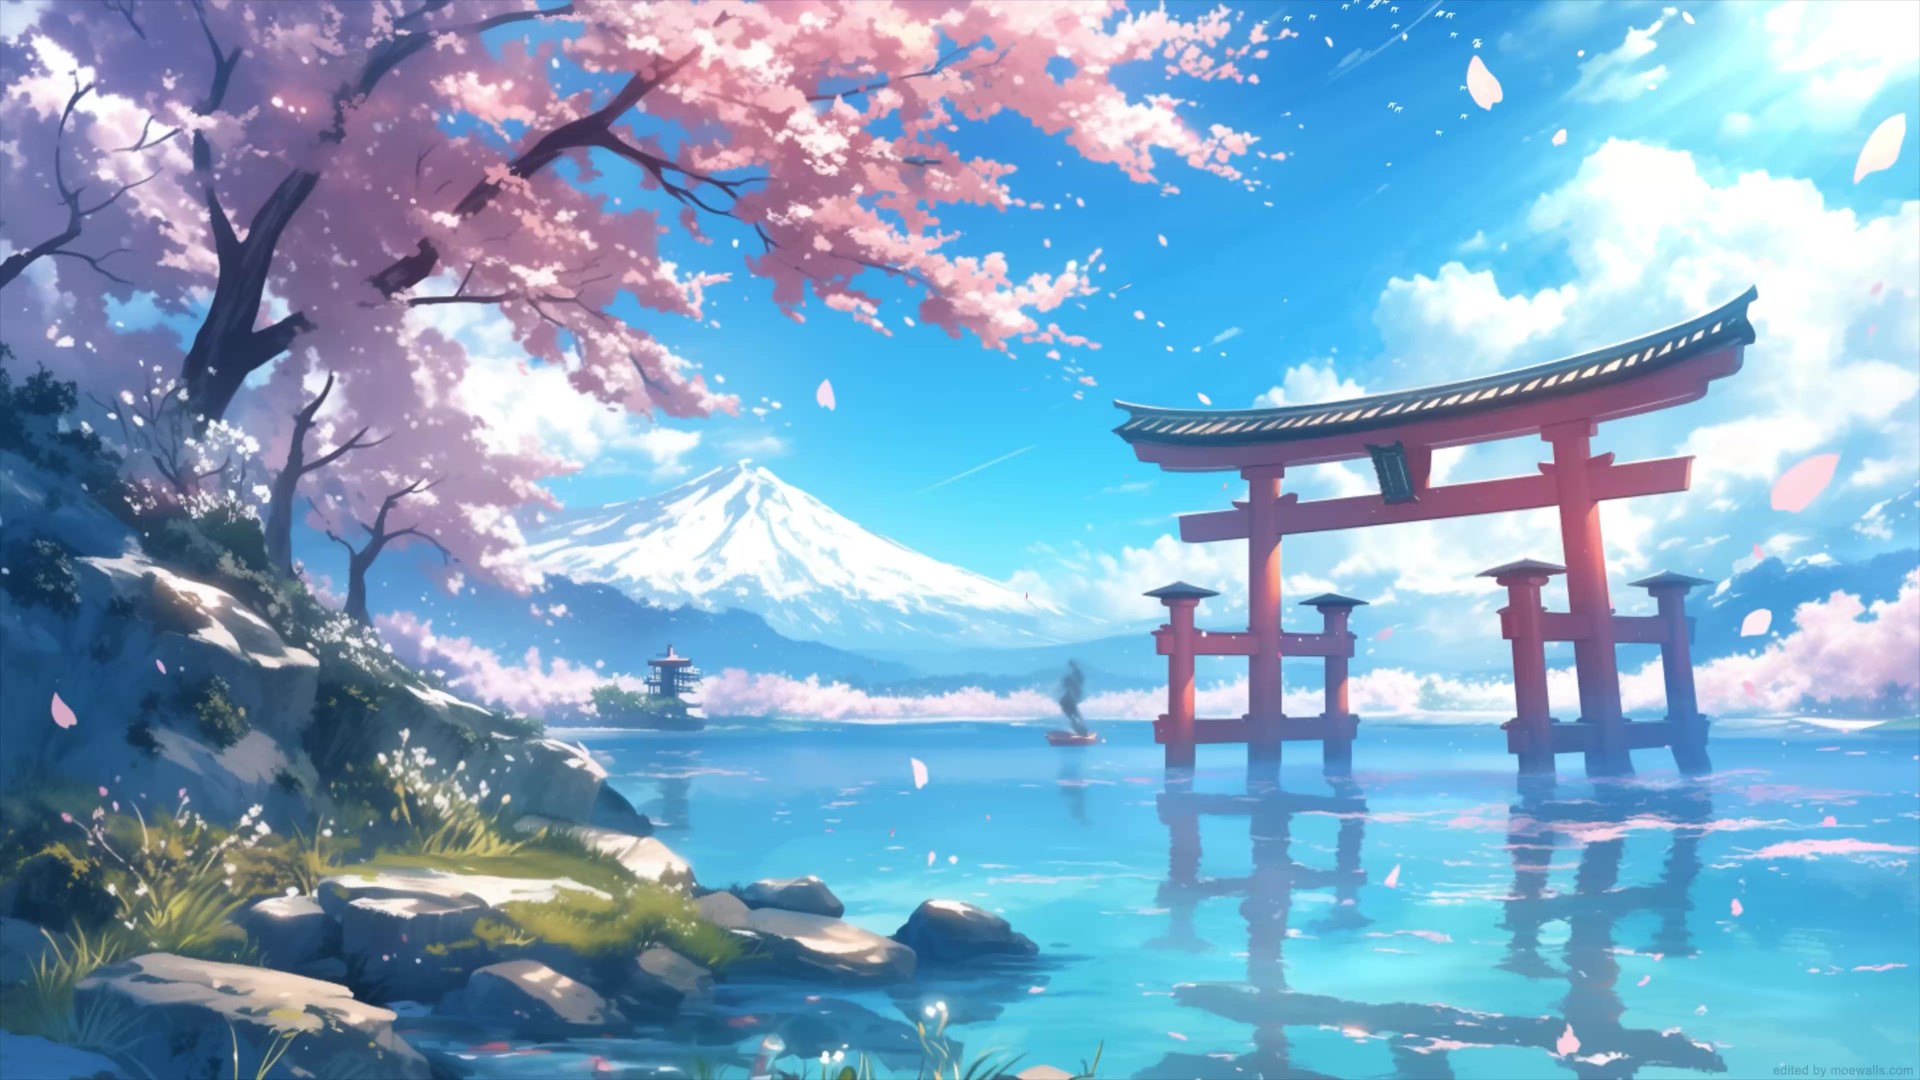 Anime Scenery Coloring Pages 26685859 Stock Photo at Vecteezy